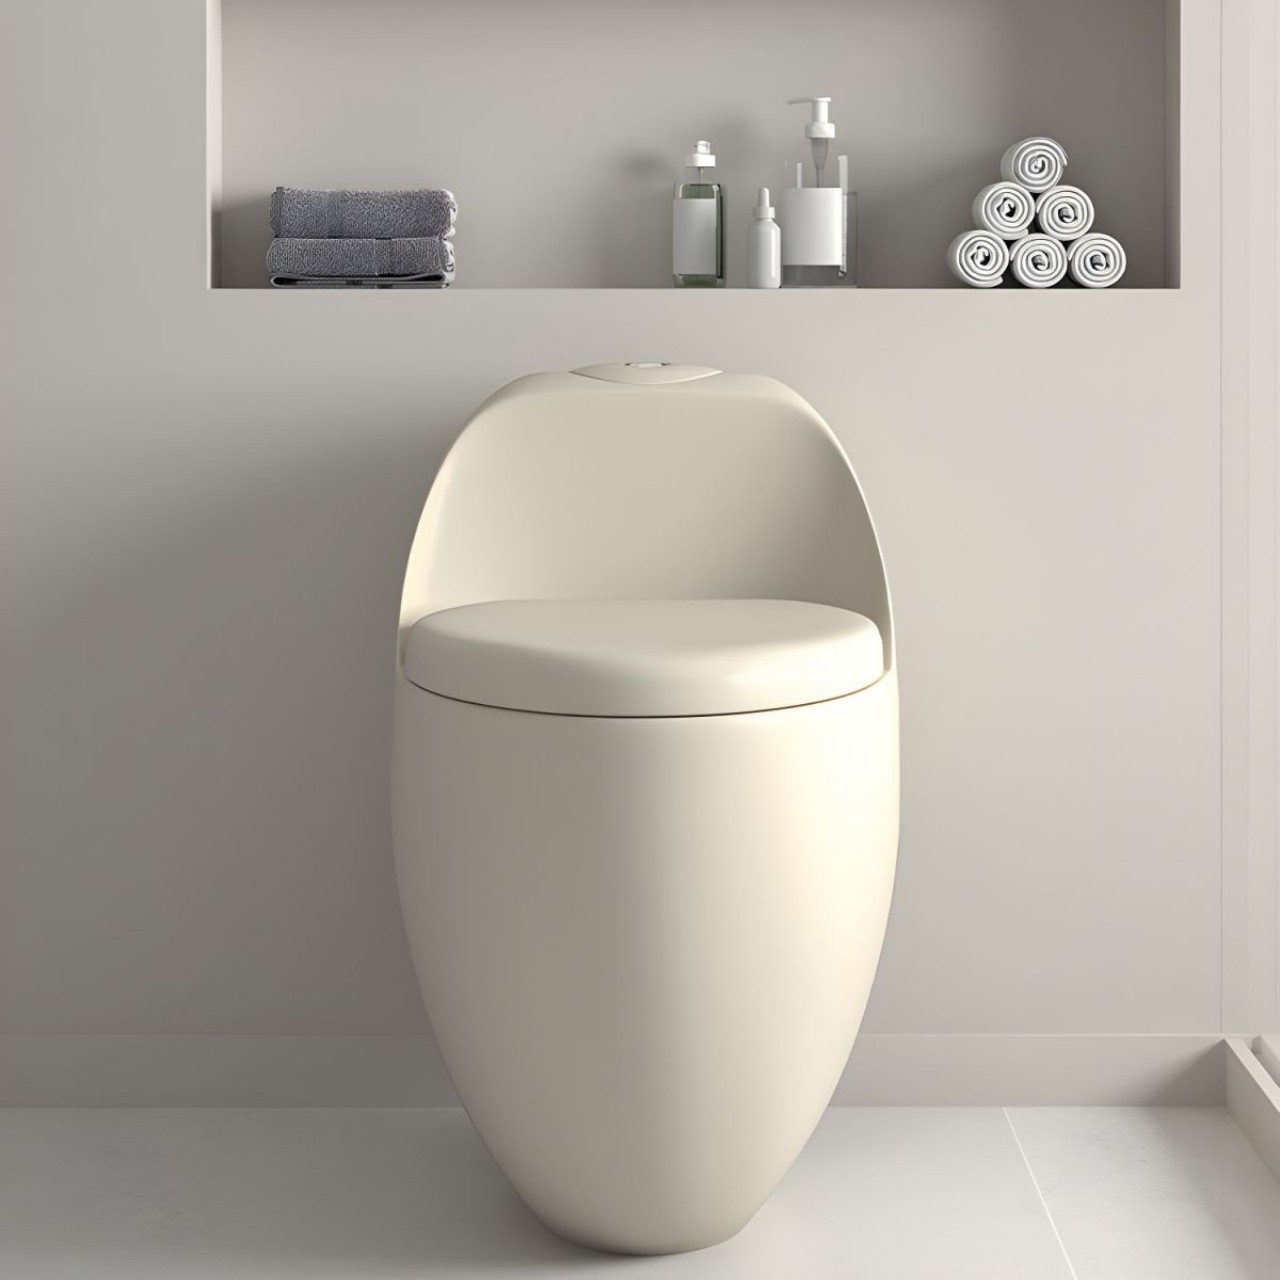 https://www.yankodesign.com/images/design_news/2023/10/wall-mounted-vs-floor-mounted-water-closets-toilet-trends-today/4-floor-mounted-2.jpg